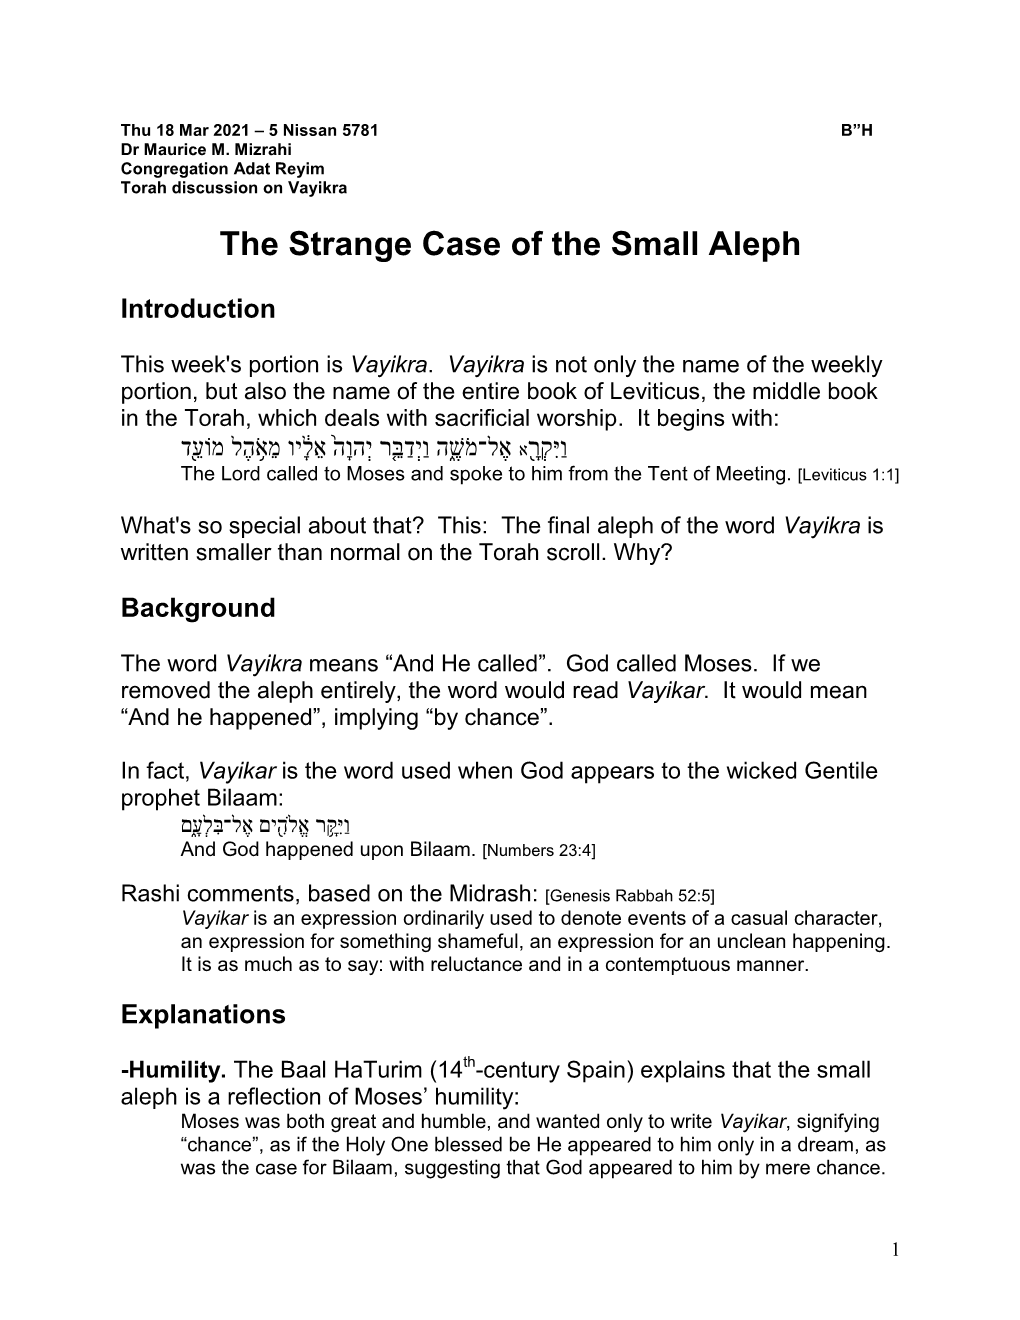 The Strange Case of the Small Aleph (Vayikra)